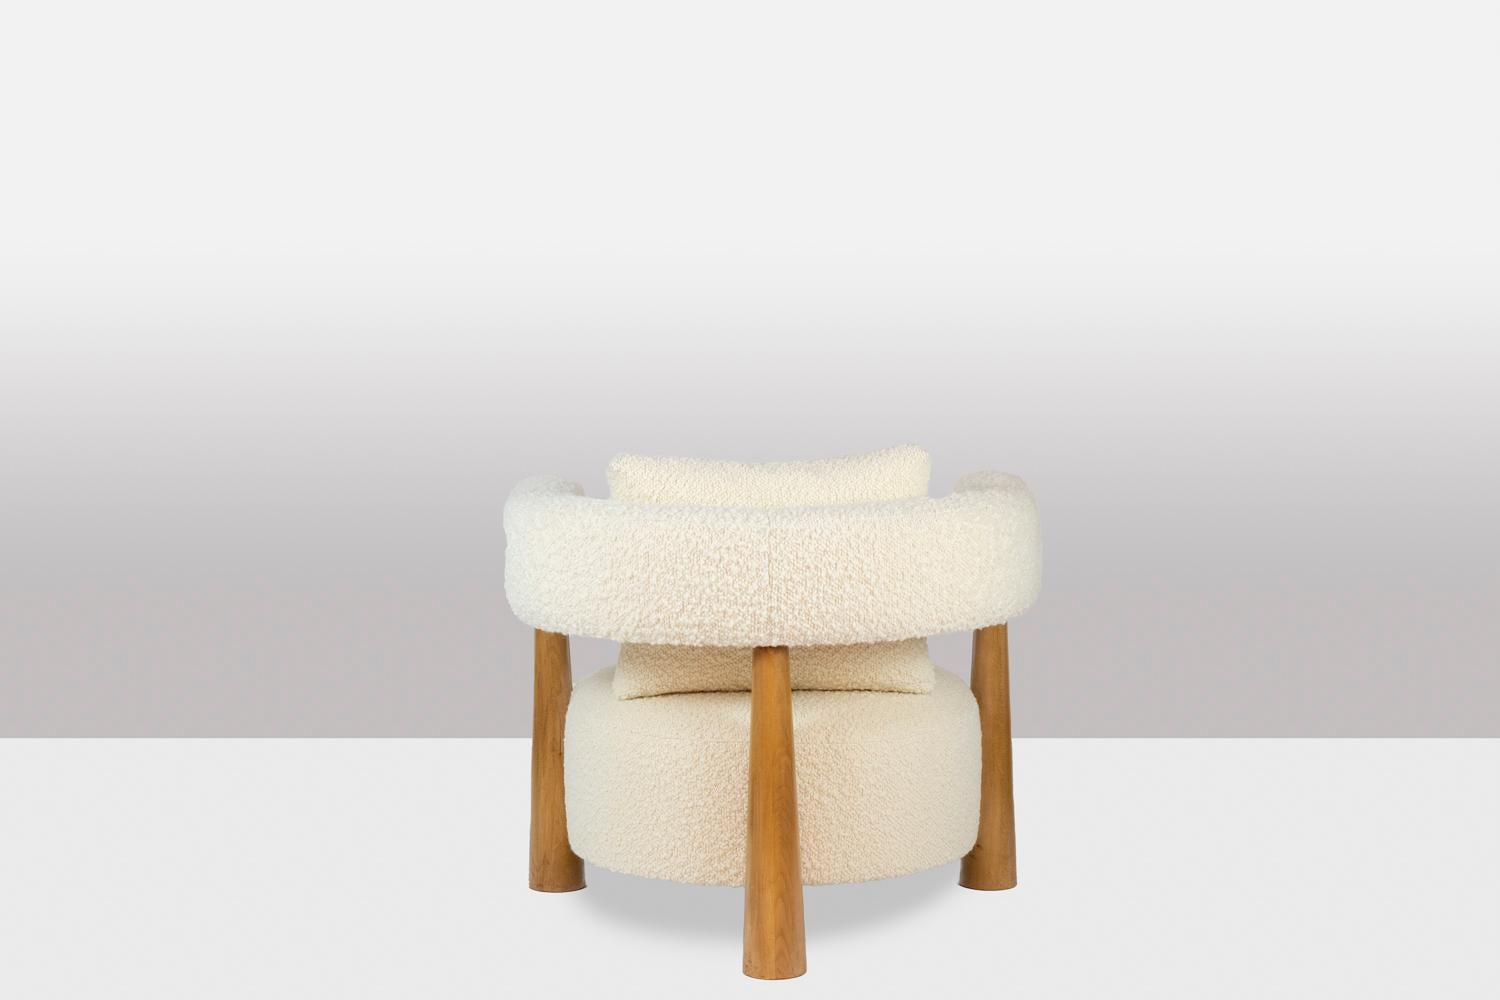 Pair of “bean” shaped or curved armchairs, in slightly veined solid blond beech with a gap between the base of the seat and the backrest, with its removable cushion. “Tripod” base, conical in shape, the 3 bases fitting into the backrest. Fabric with